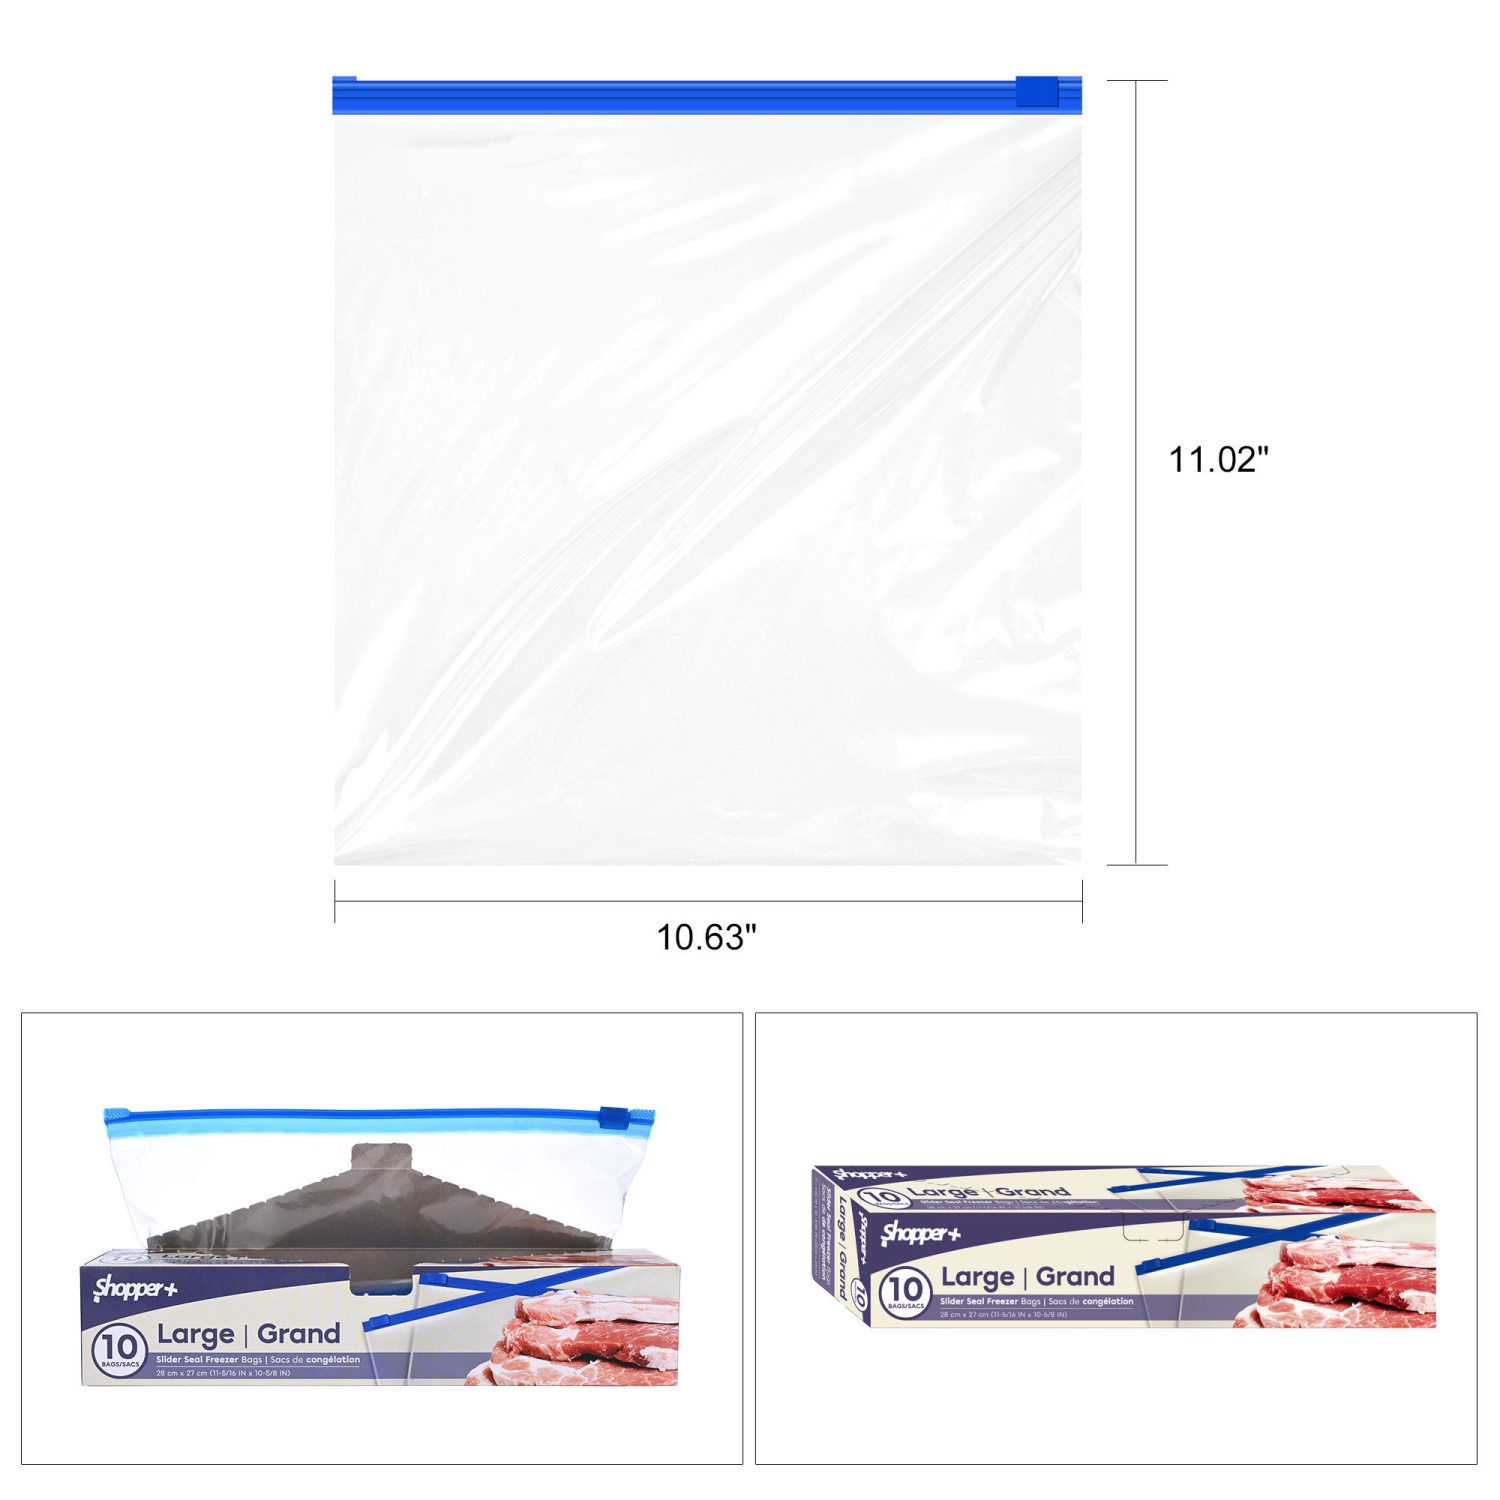 Leakproof Slide Seal Food Storage Freezer Bags, Large Size BPA Free, 10ct with Sliding Zipper for freezing meat,fish and vegetables